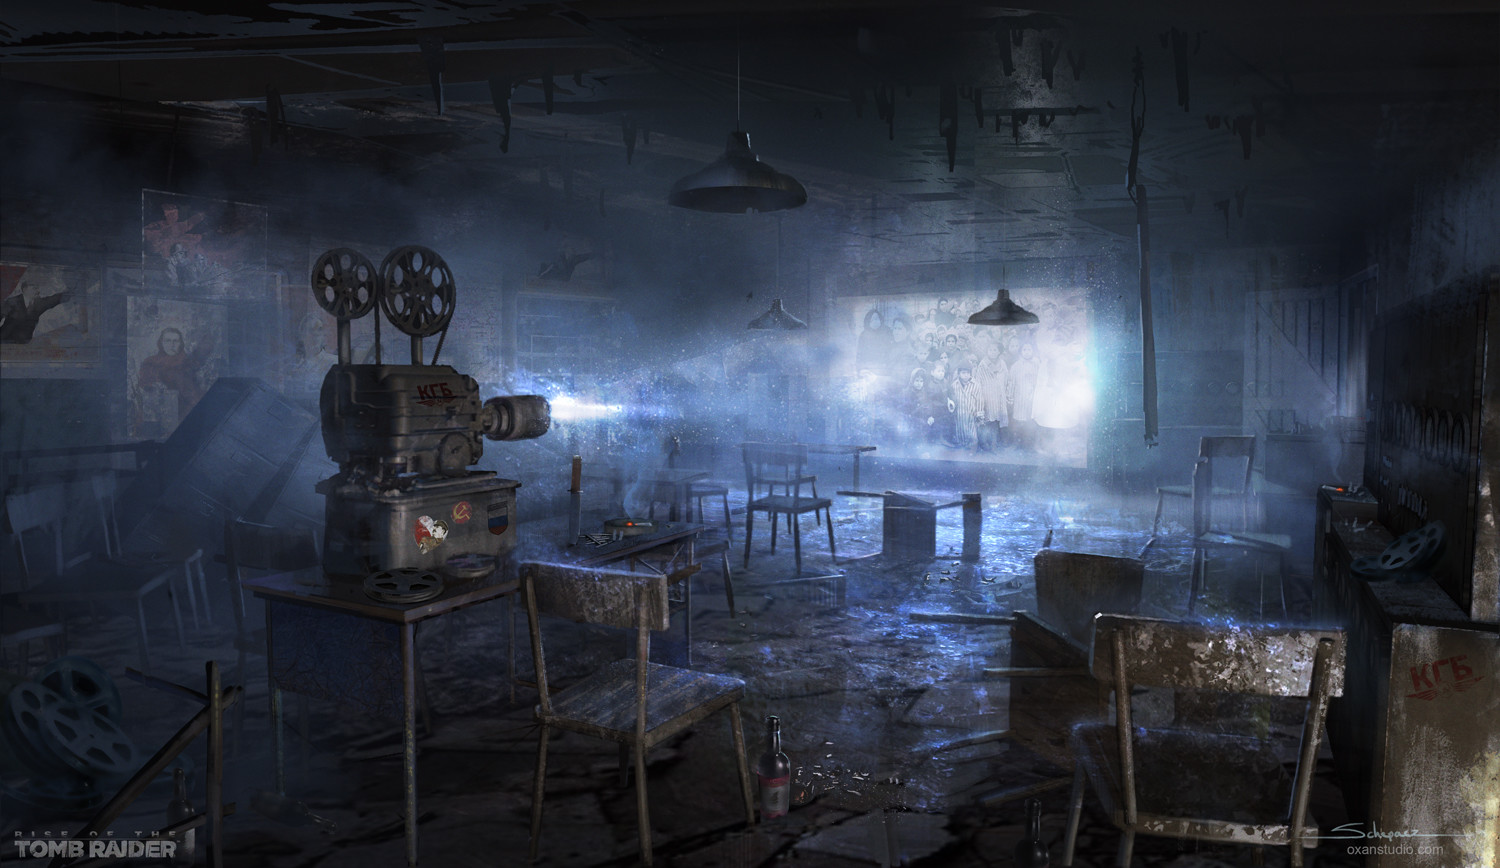 Fine Art: The Concept Art Behind Rise Of The Tomb Raider